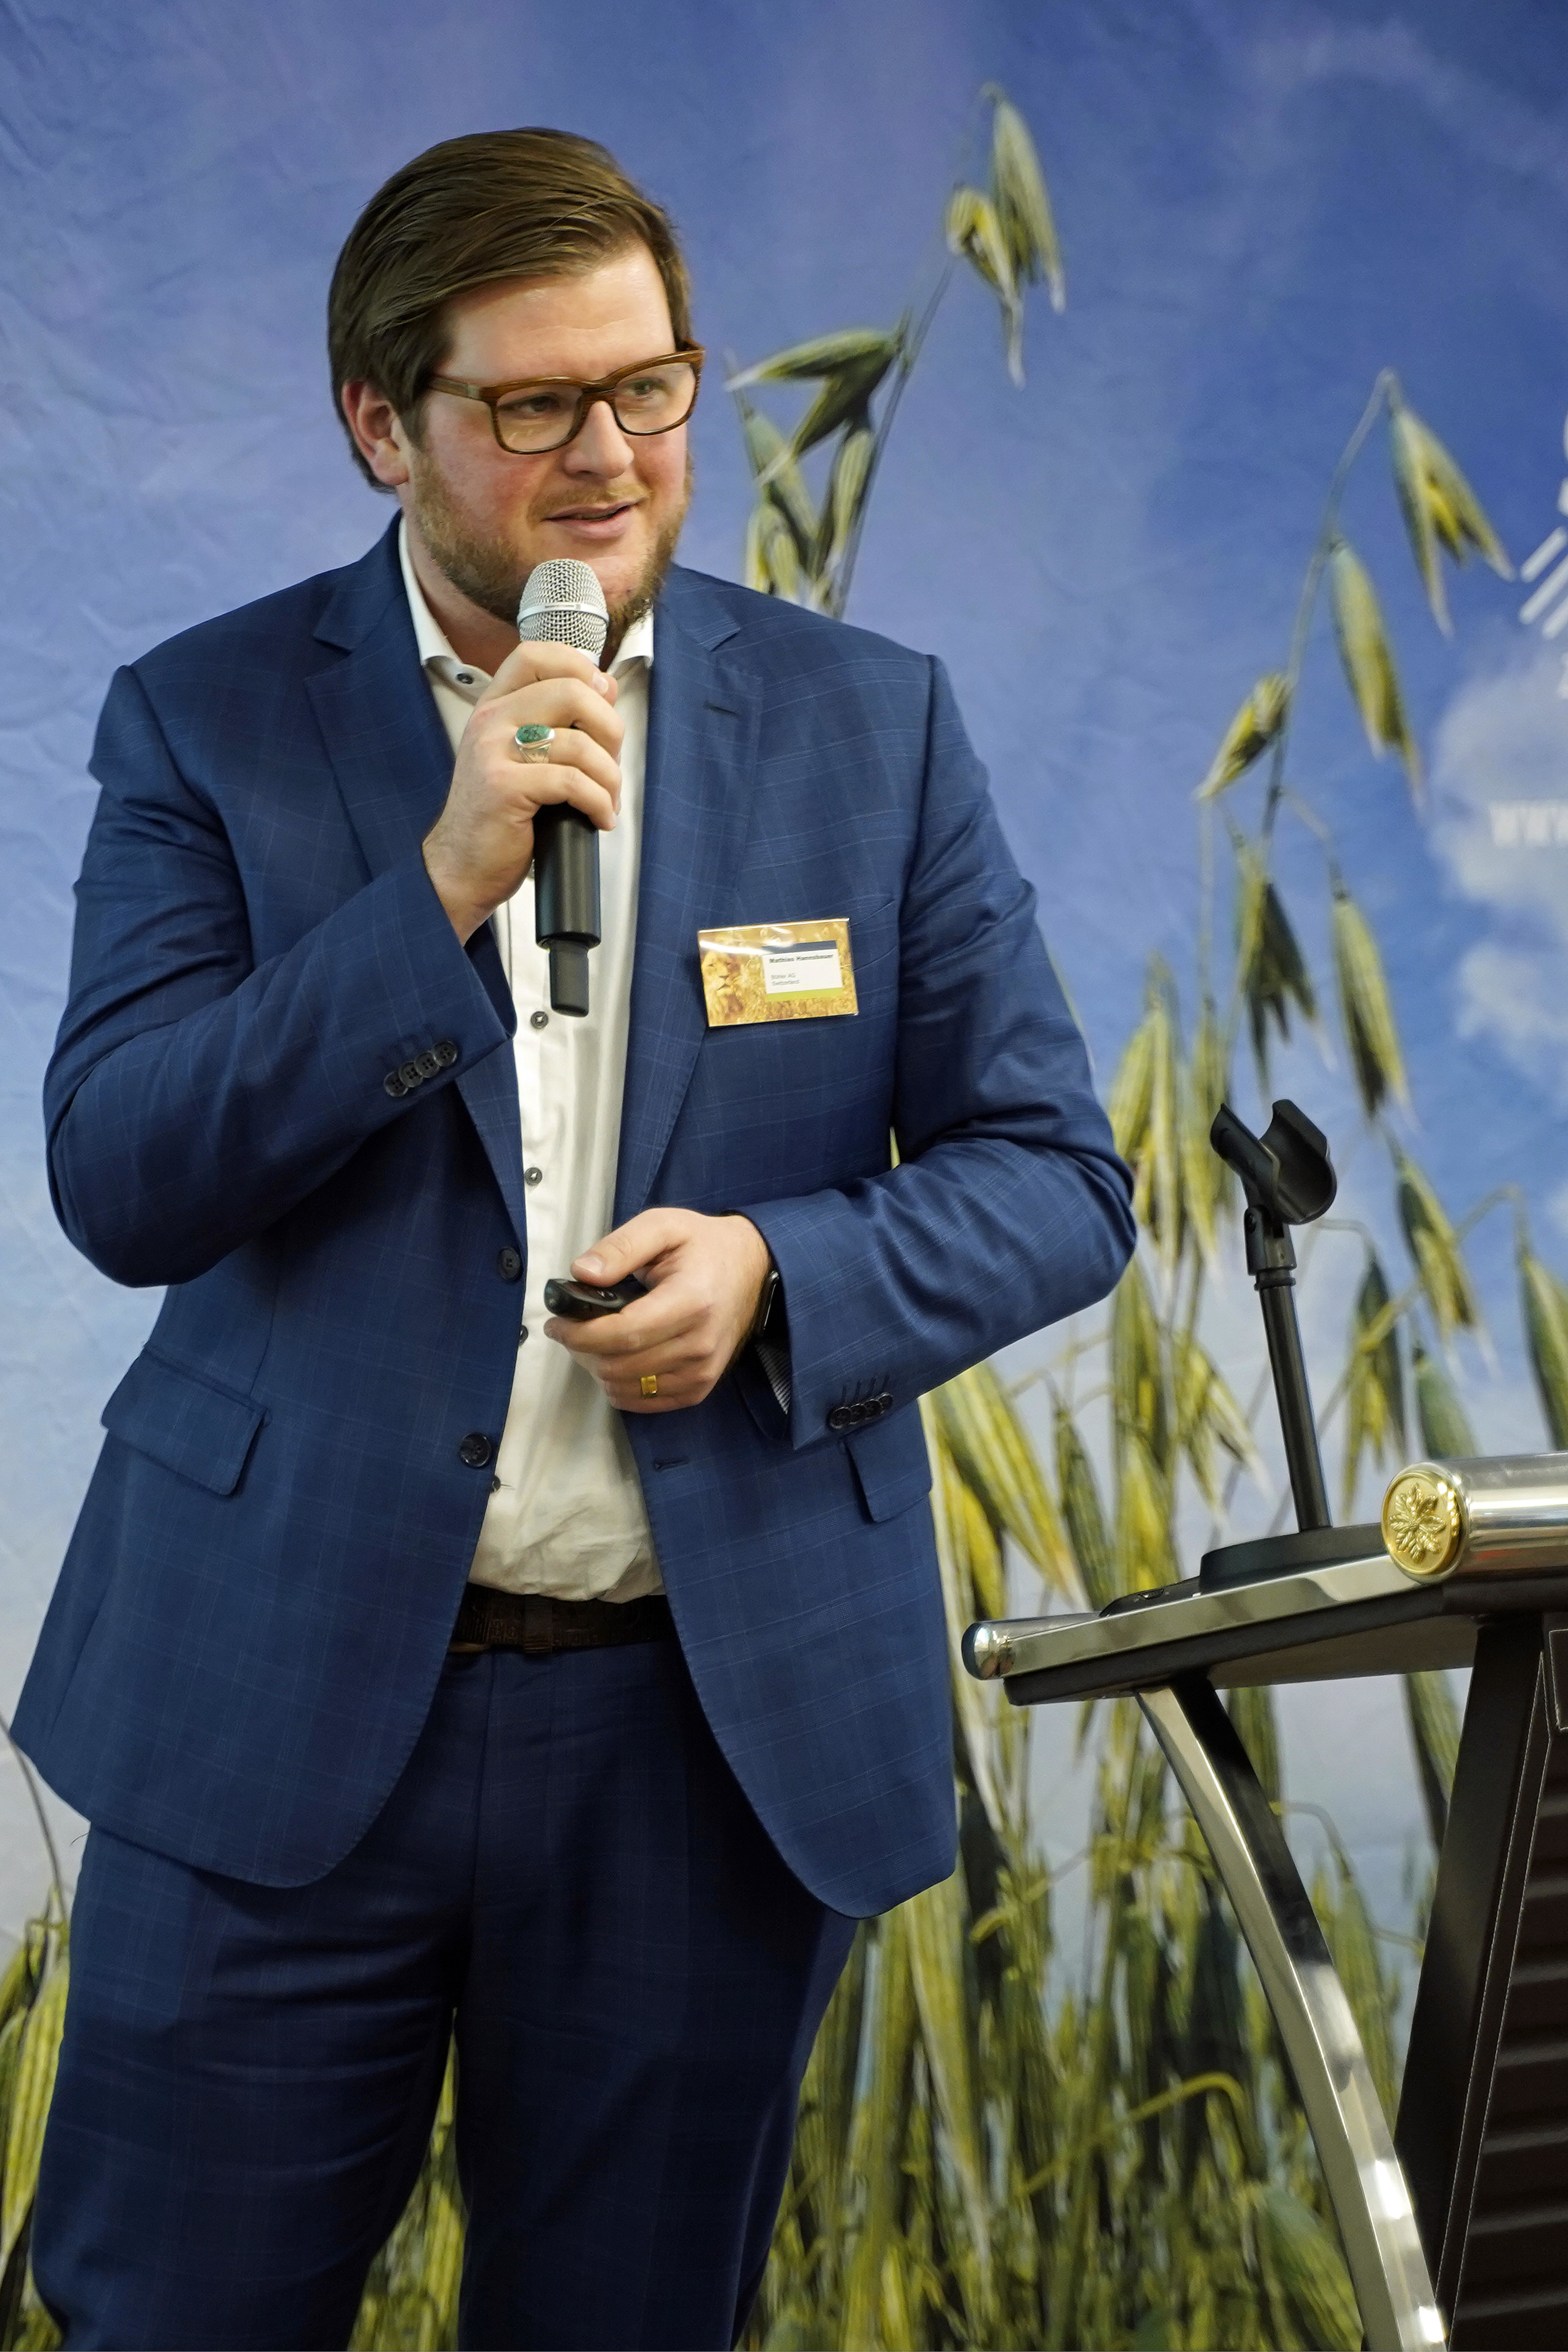 Matthias Hannsbauer, Bühler AG: Oat grains, which are basically gluten free, should be harvested and processed as carefully as possible